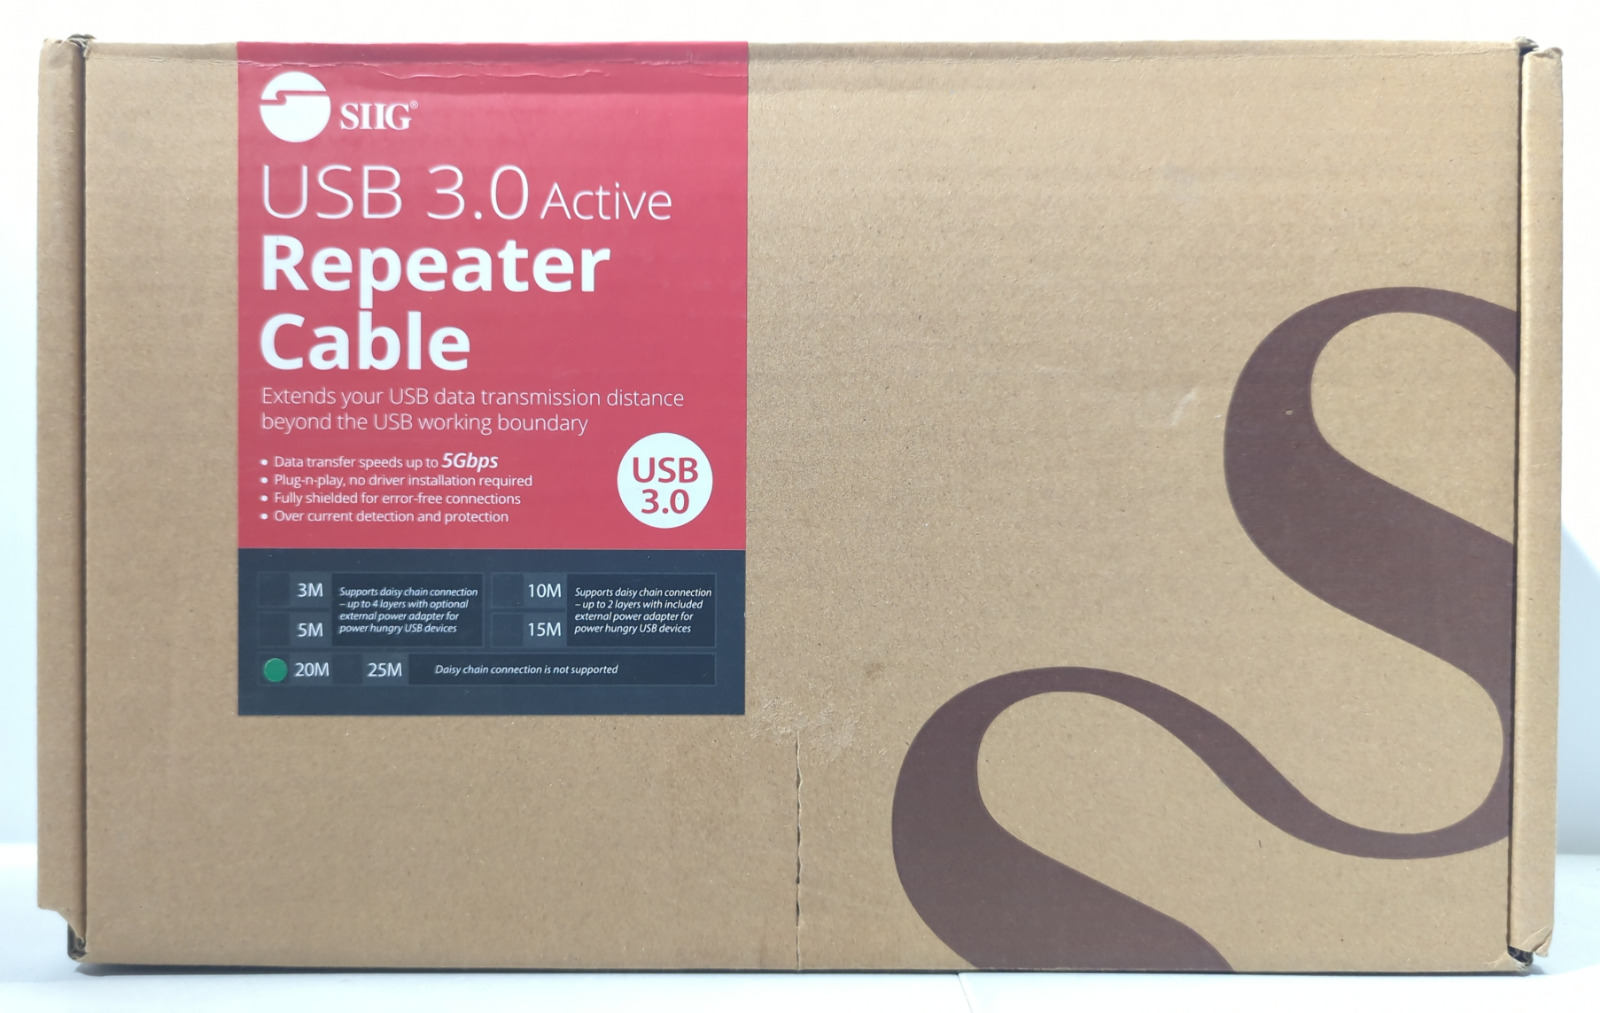 Siig JU-CB0811-S1 USB 3.0 Active Repeater Cable - 20 m / 65.5 feet